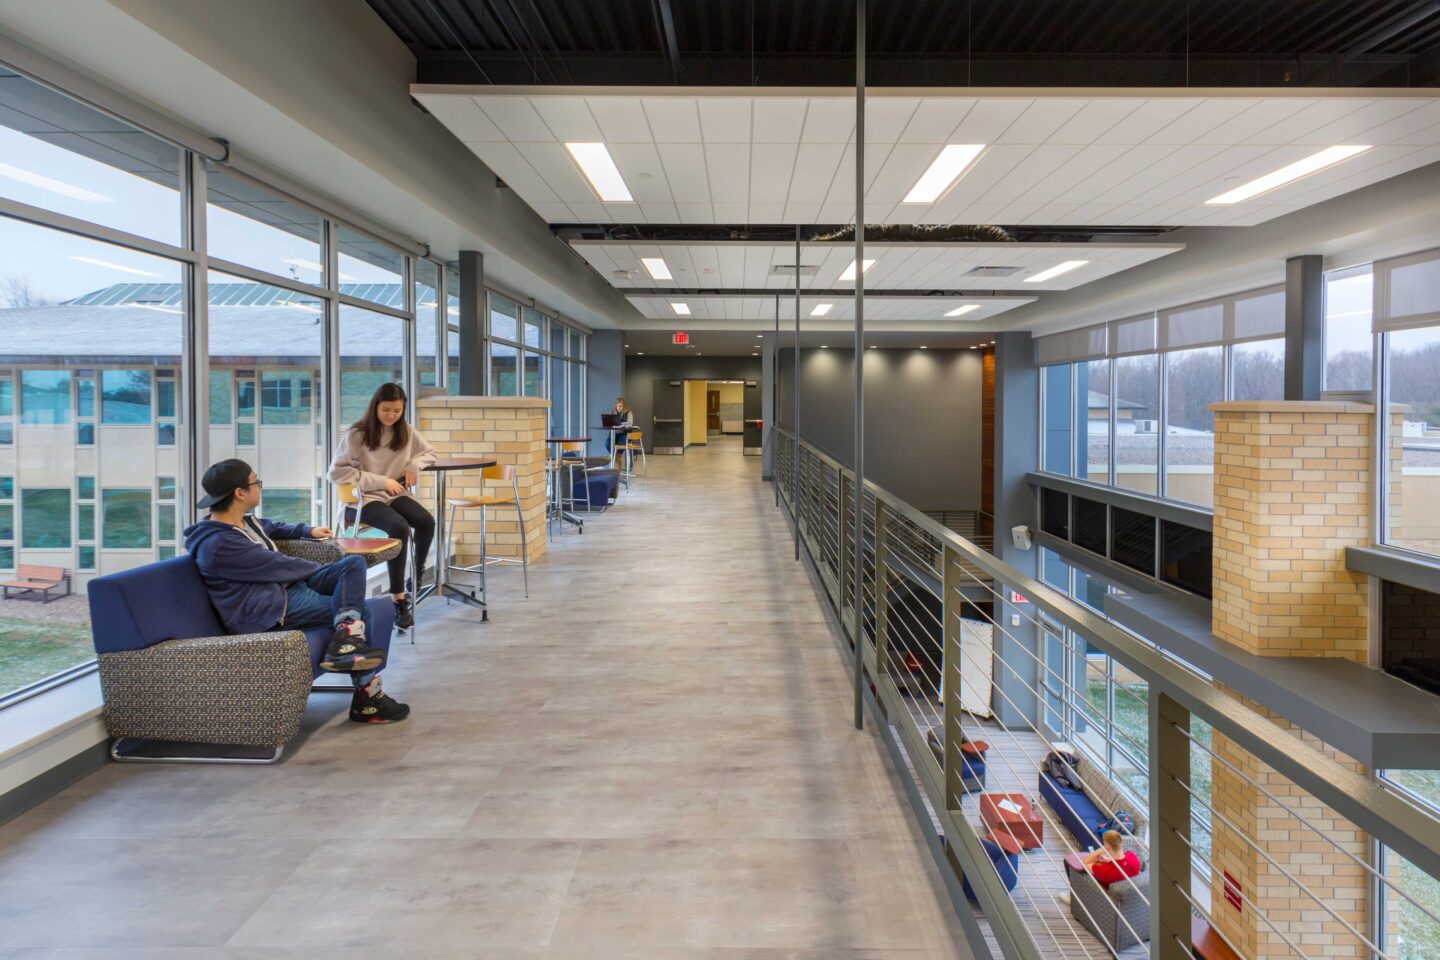 Students study in wide, windowed spaces lofted above a commons